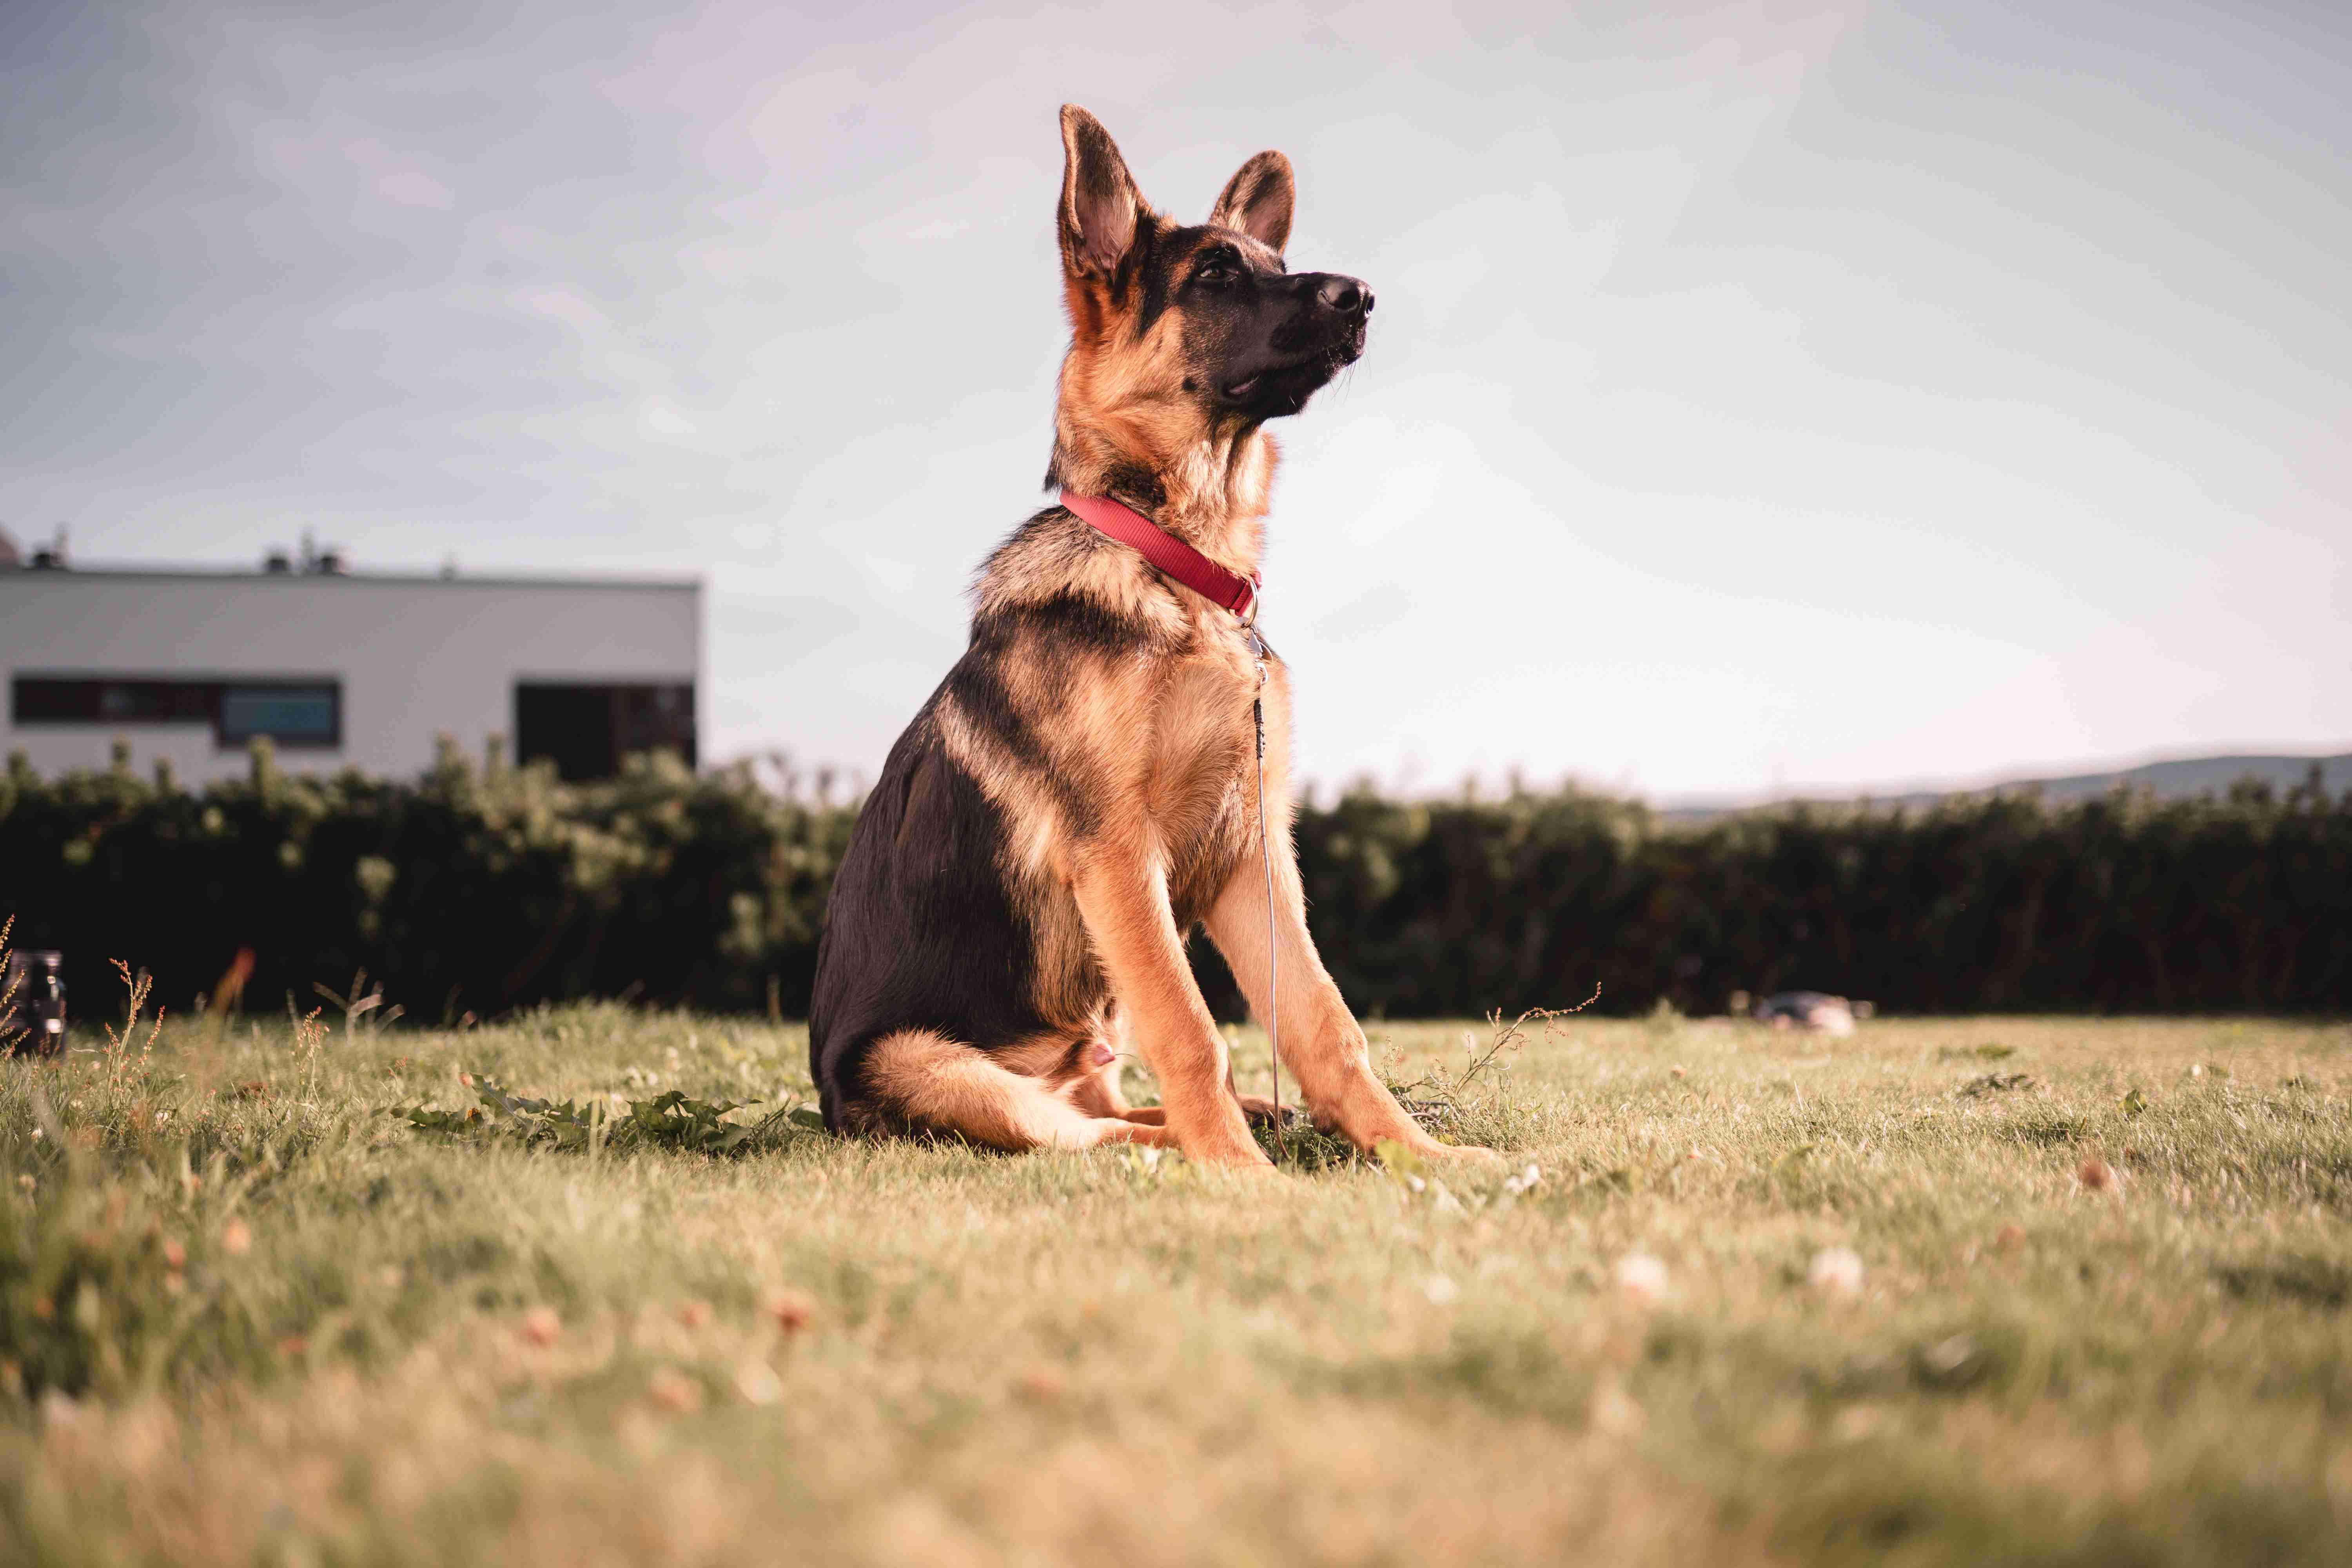 What kind of training aids are recommended for a German Shepherd living in an apartment?